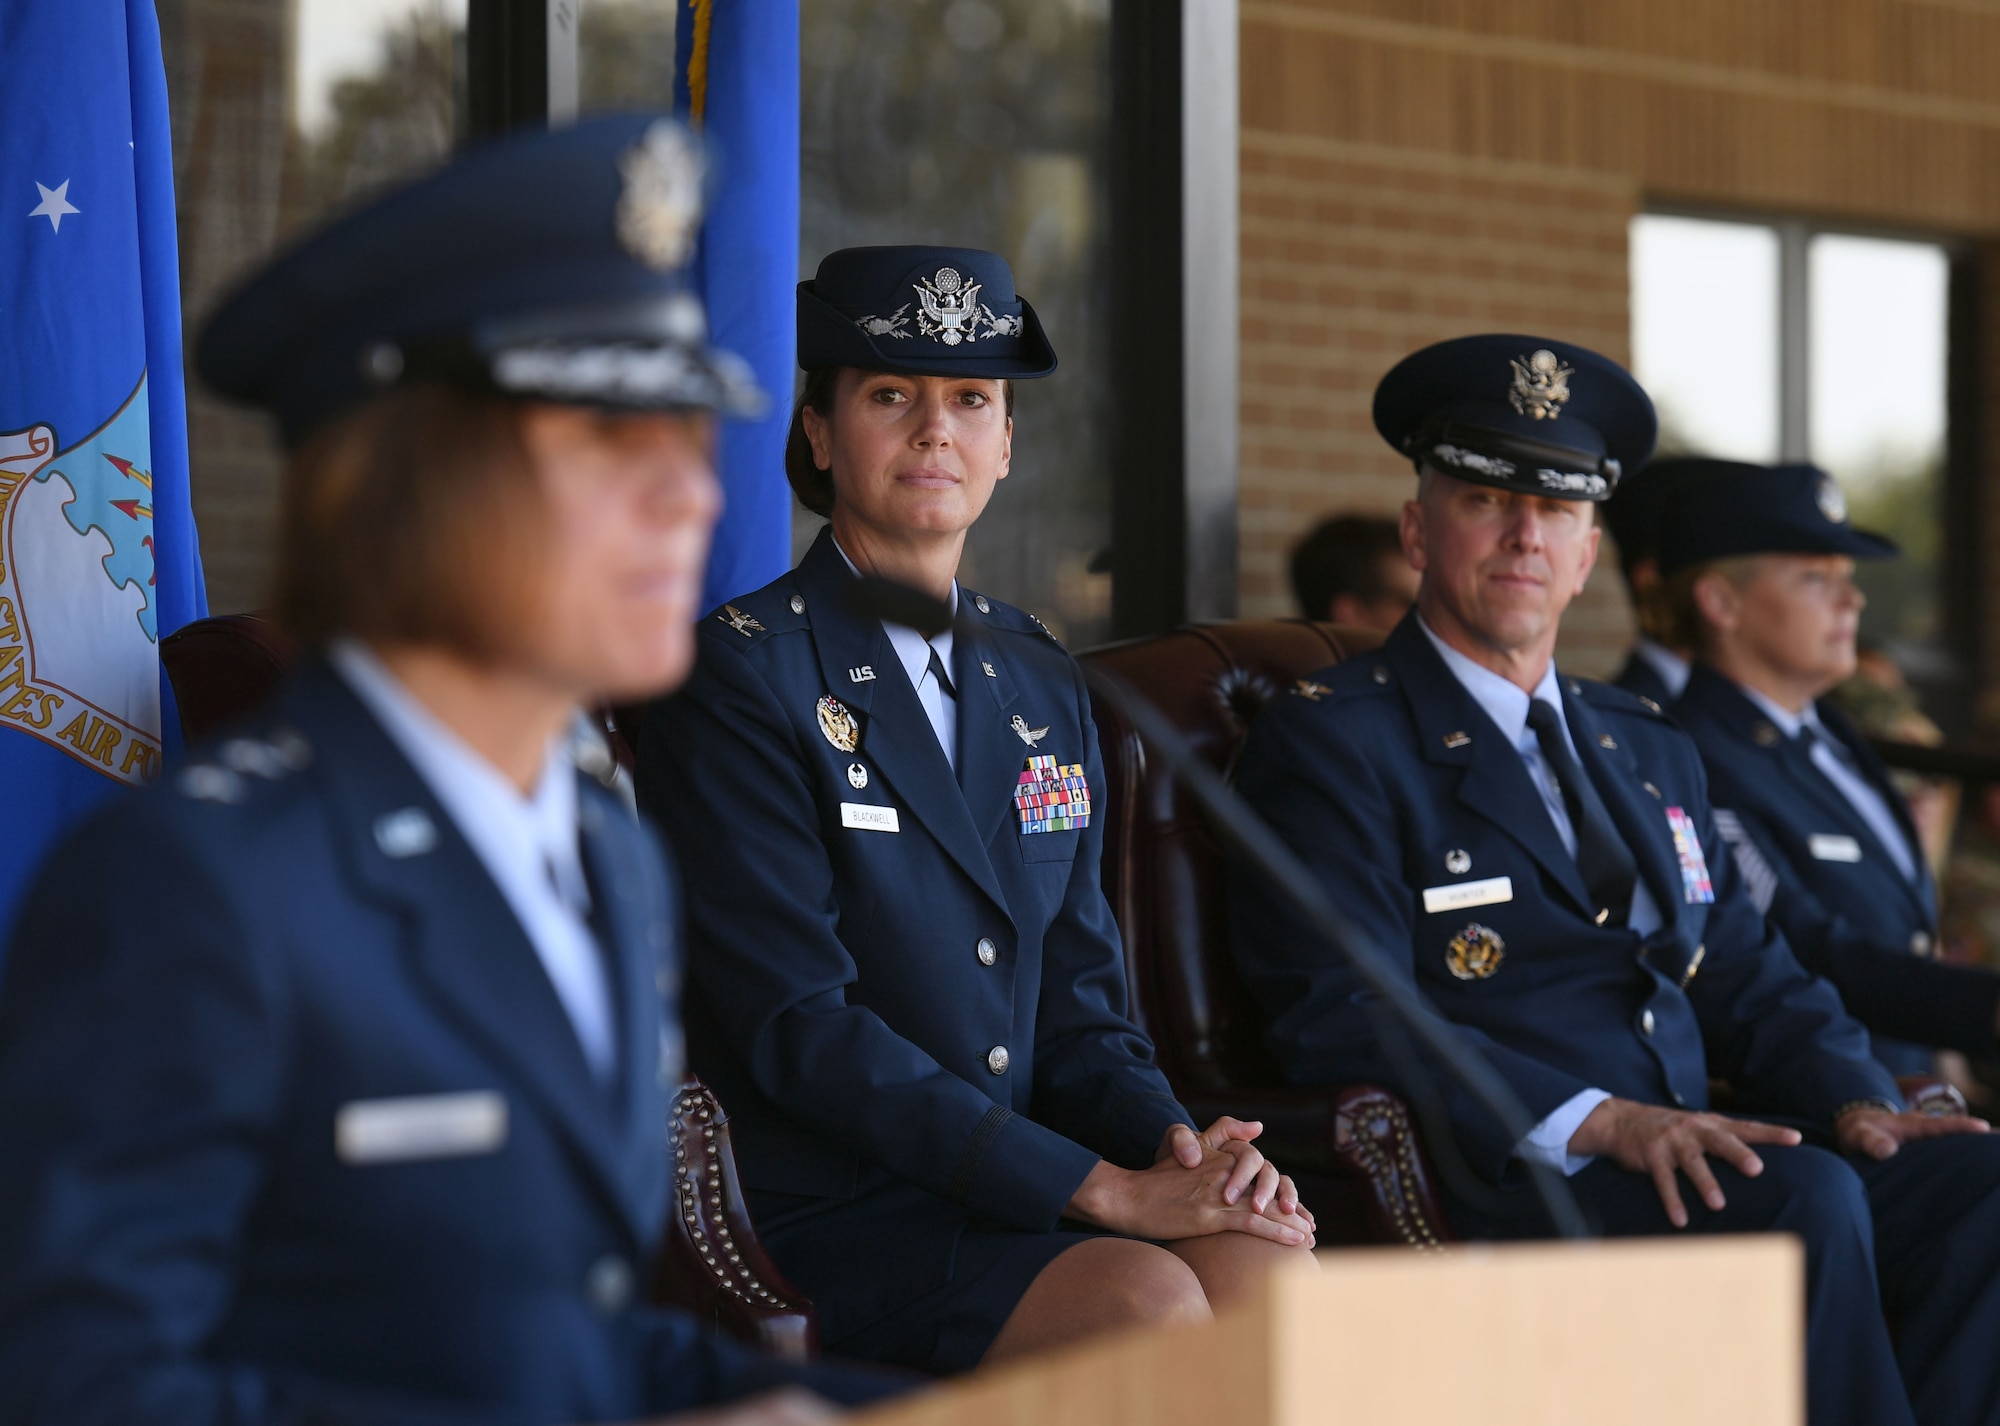 U.S. Air Force Col. Heather Blackwell, outgoing 81st Training Wing commander, and Col. William Hunter, incoming 81st TRW commander, looks on as Maj. Gen. Andrea Tullos, Second Air Force commander, delivers remarks during the change of command ceremony on the Levitow Training Support Facility drill pad at Keesler Air Force Base, Mississippi, June 17, 2021. The ceremony is a symbol of command being exchanged from one commander to the next by the handing-off of a ceremonial guidon. Blackwell is now assigned to the Air Combat Command. (U.S. Air Force photo by Kemberly Groue)